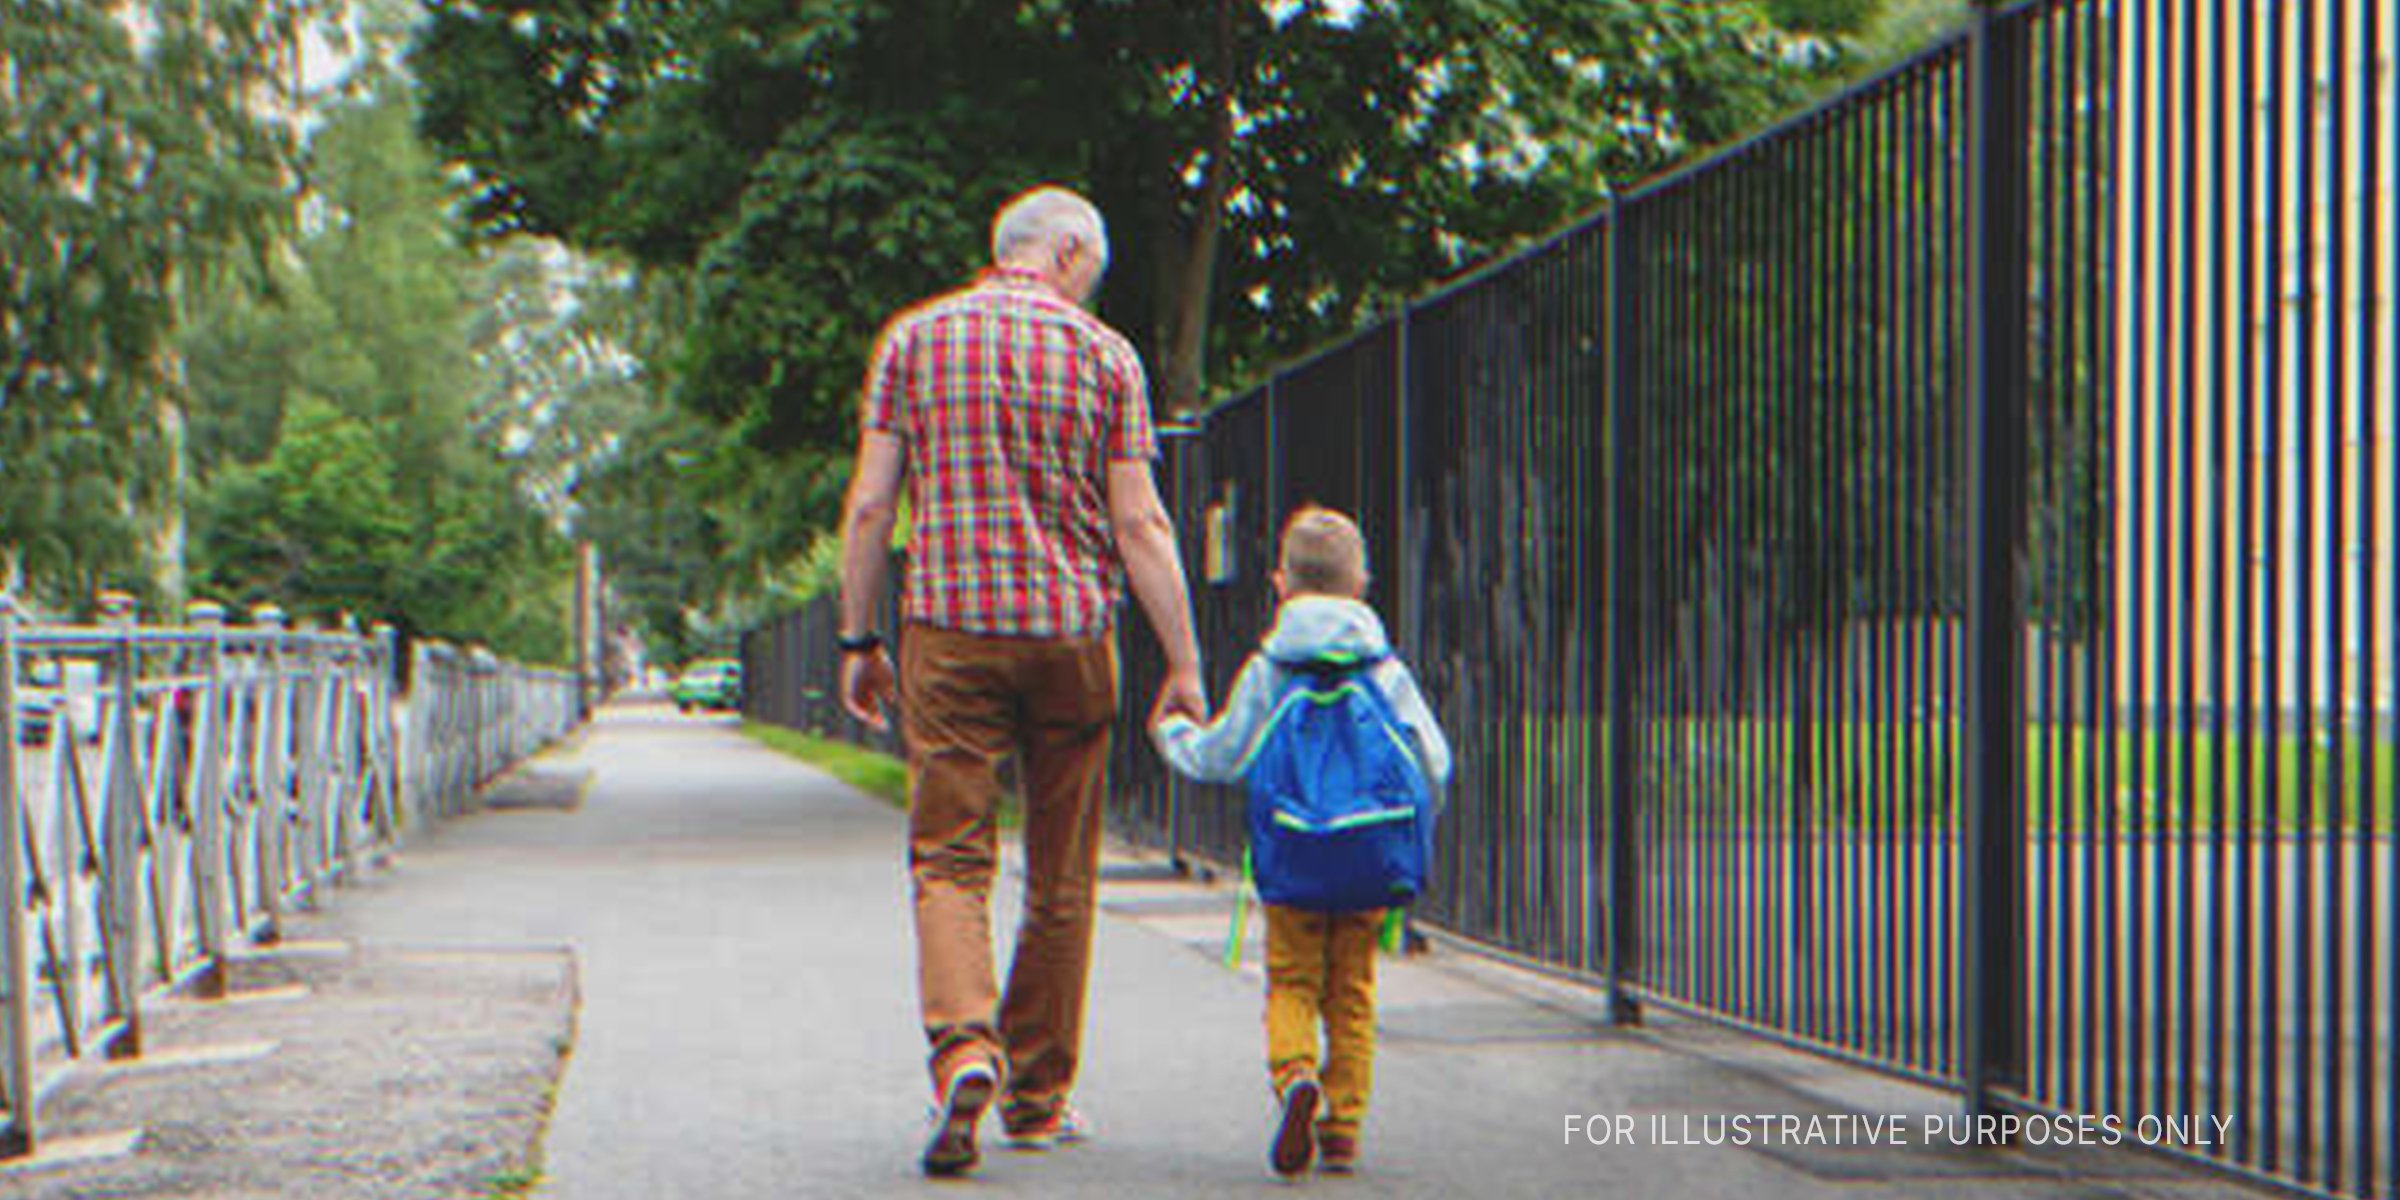 Man and Boy Holding Hands While Walking. | Source: Shutterstock